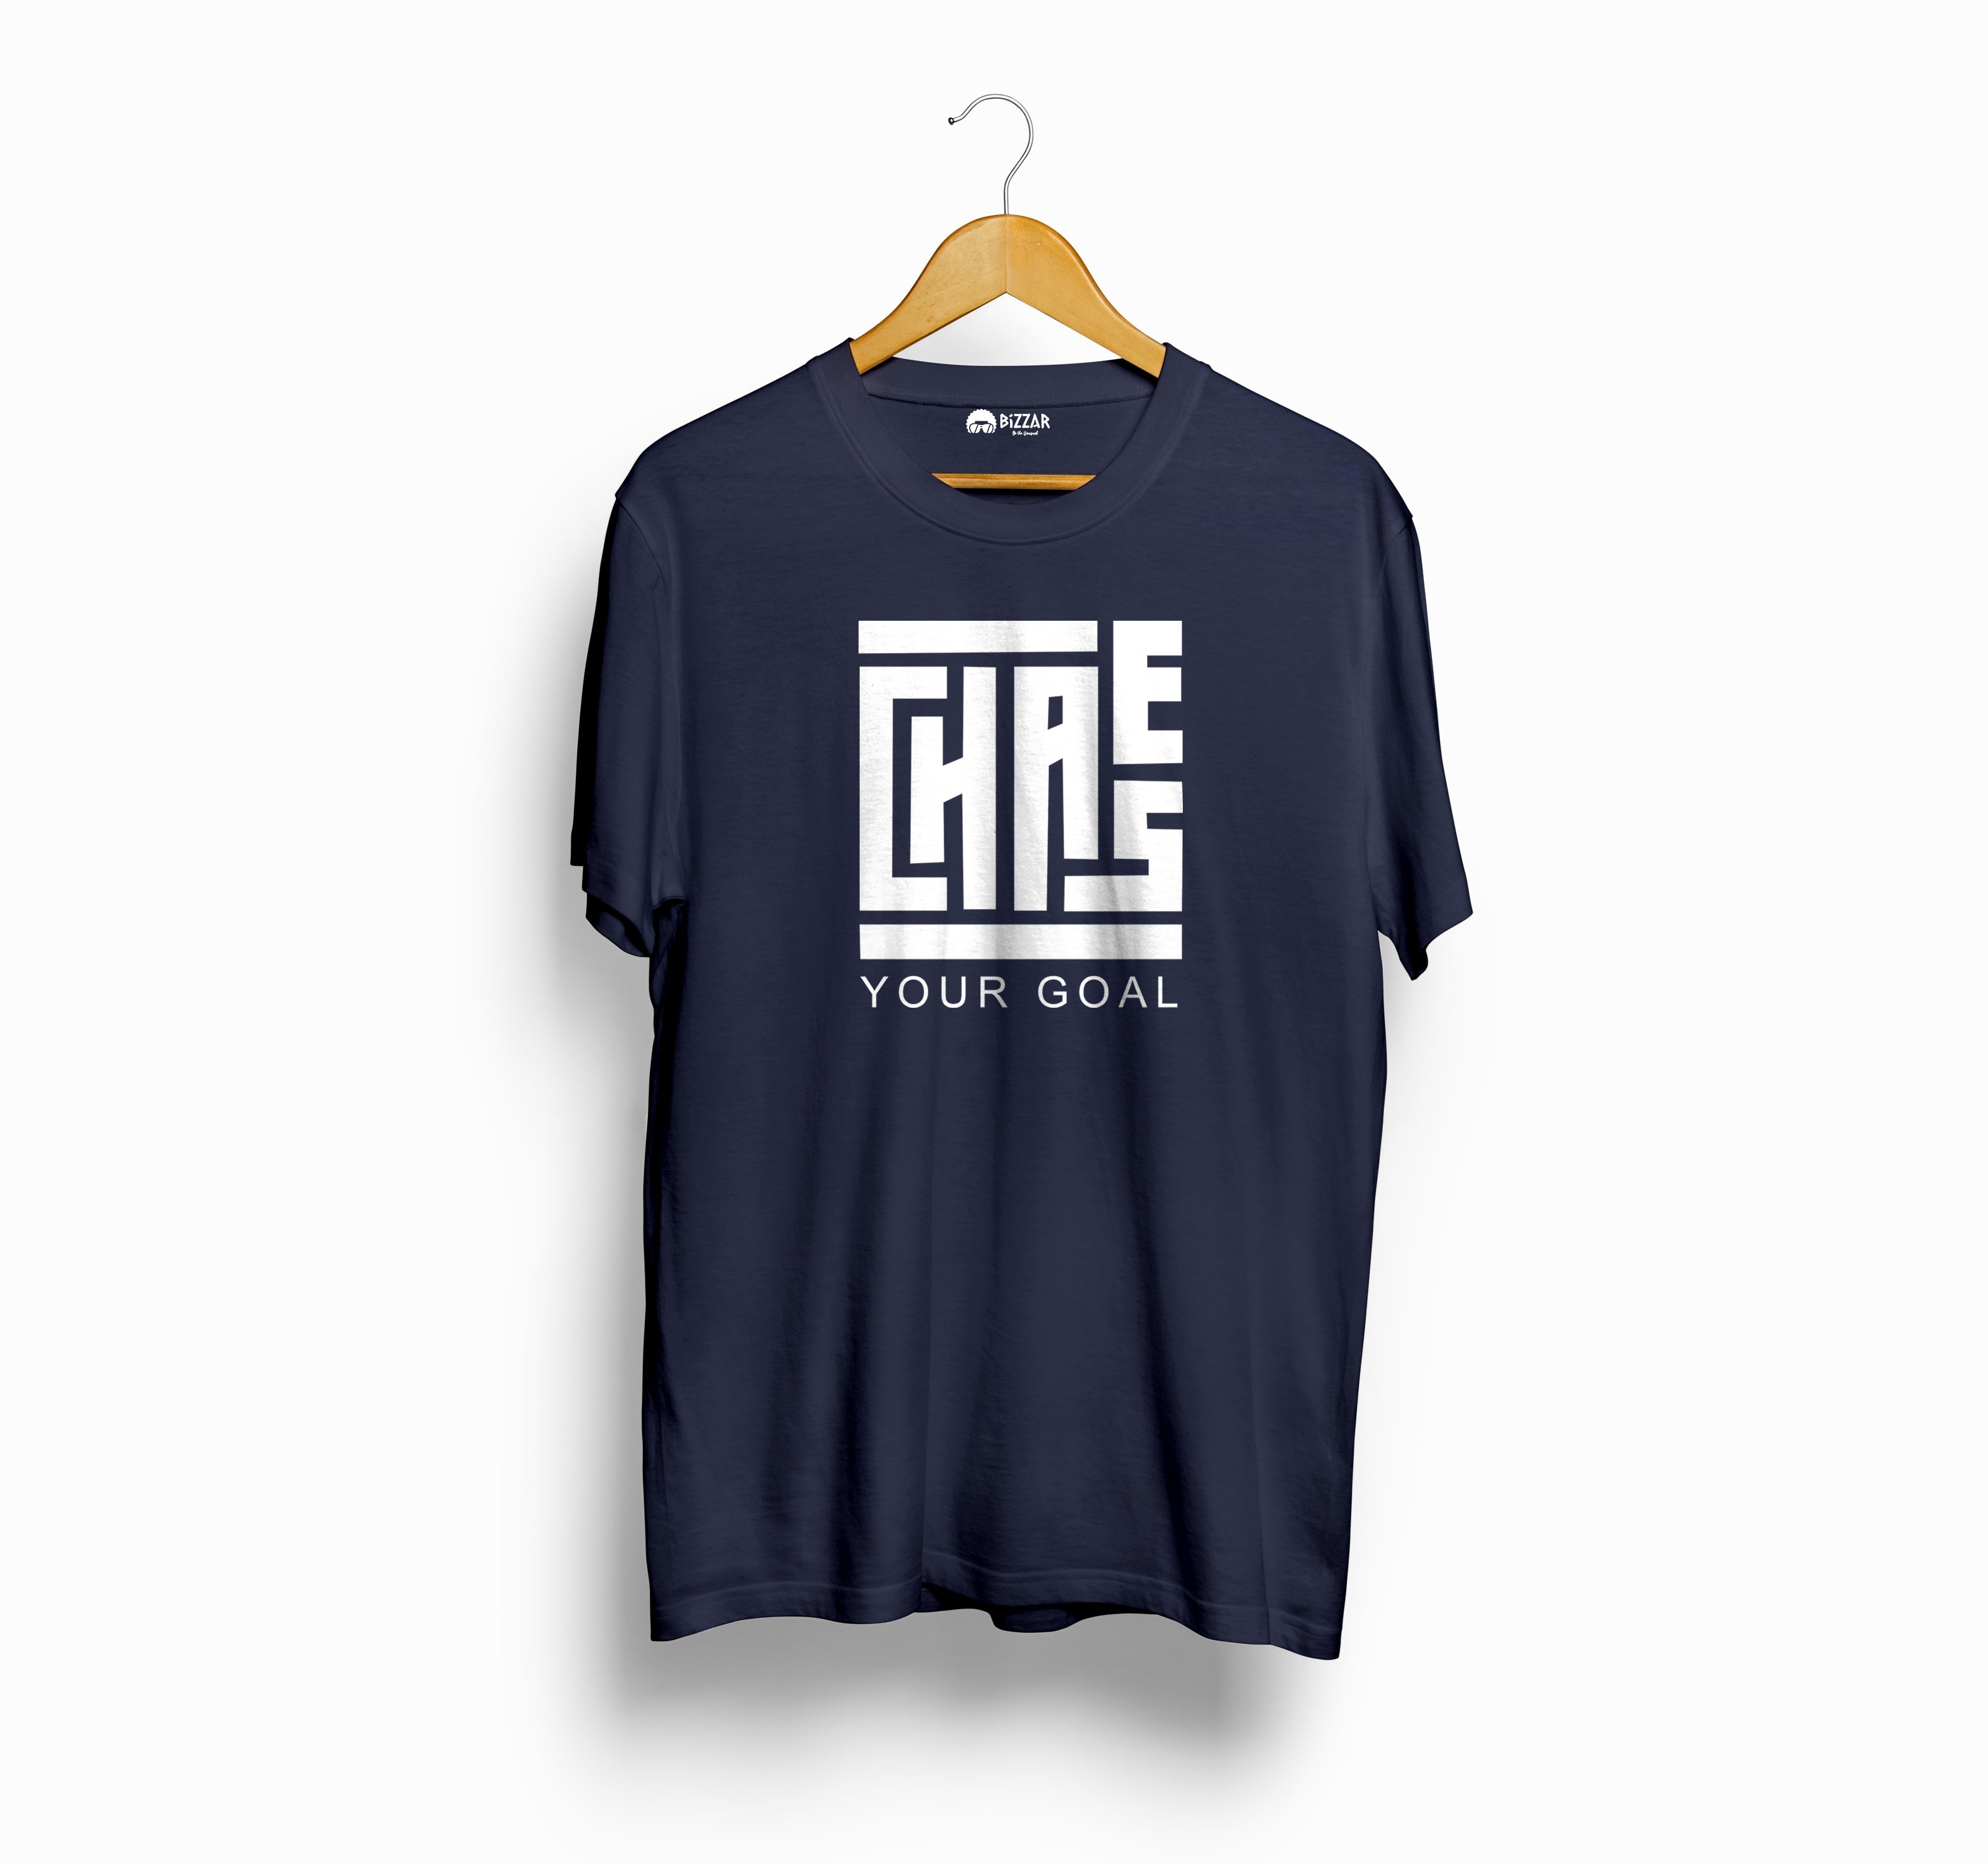 Bizzar's Chase Your Goal Navy Blue T-Shirt